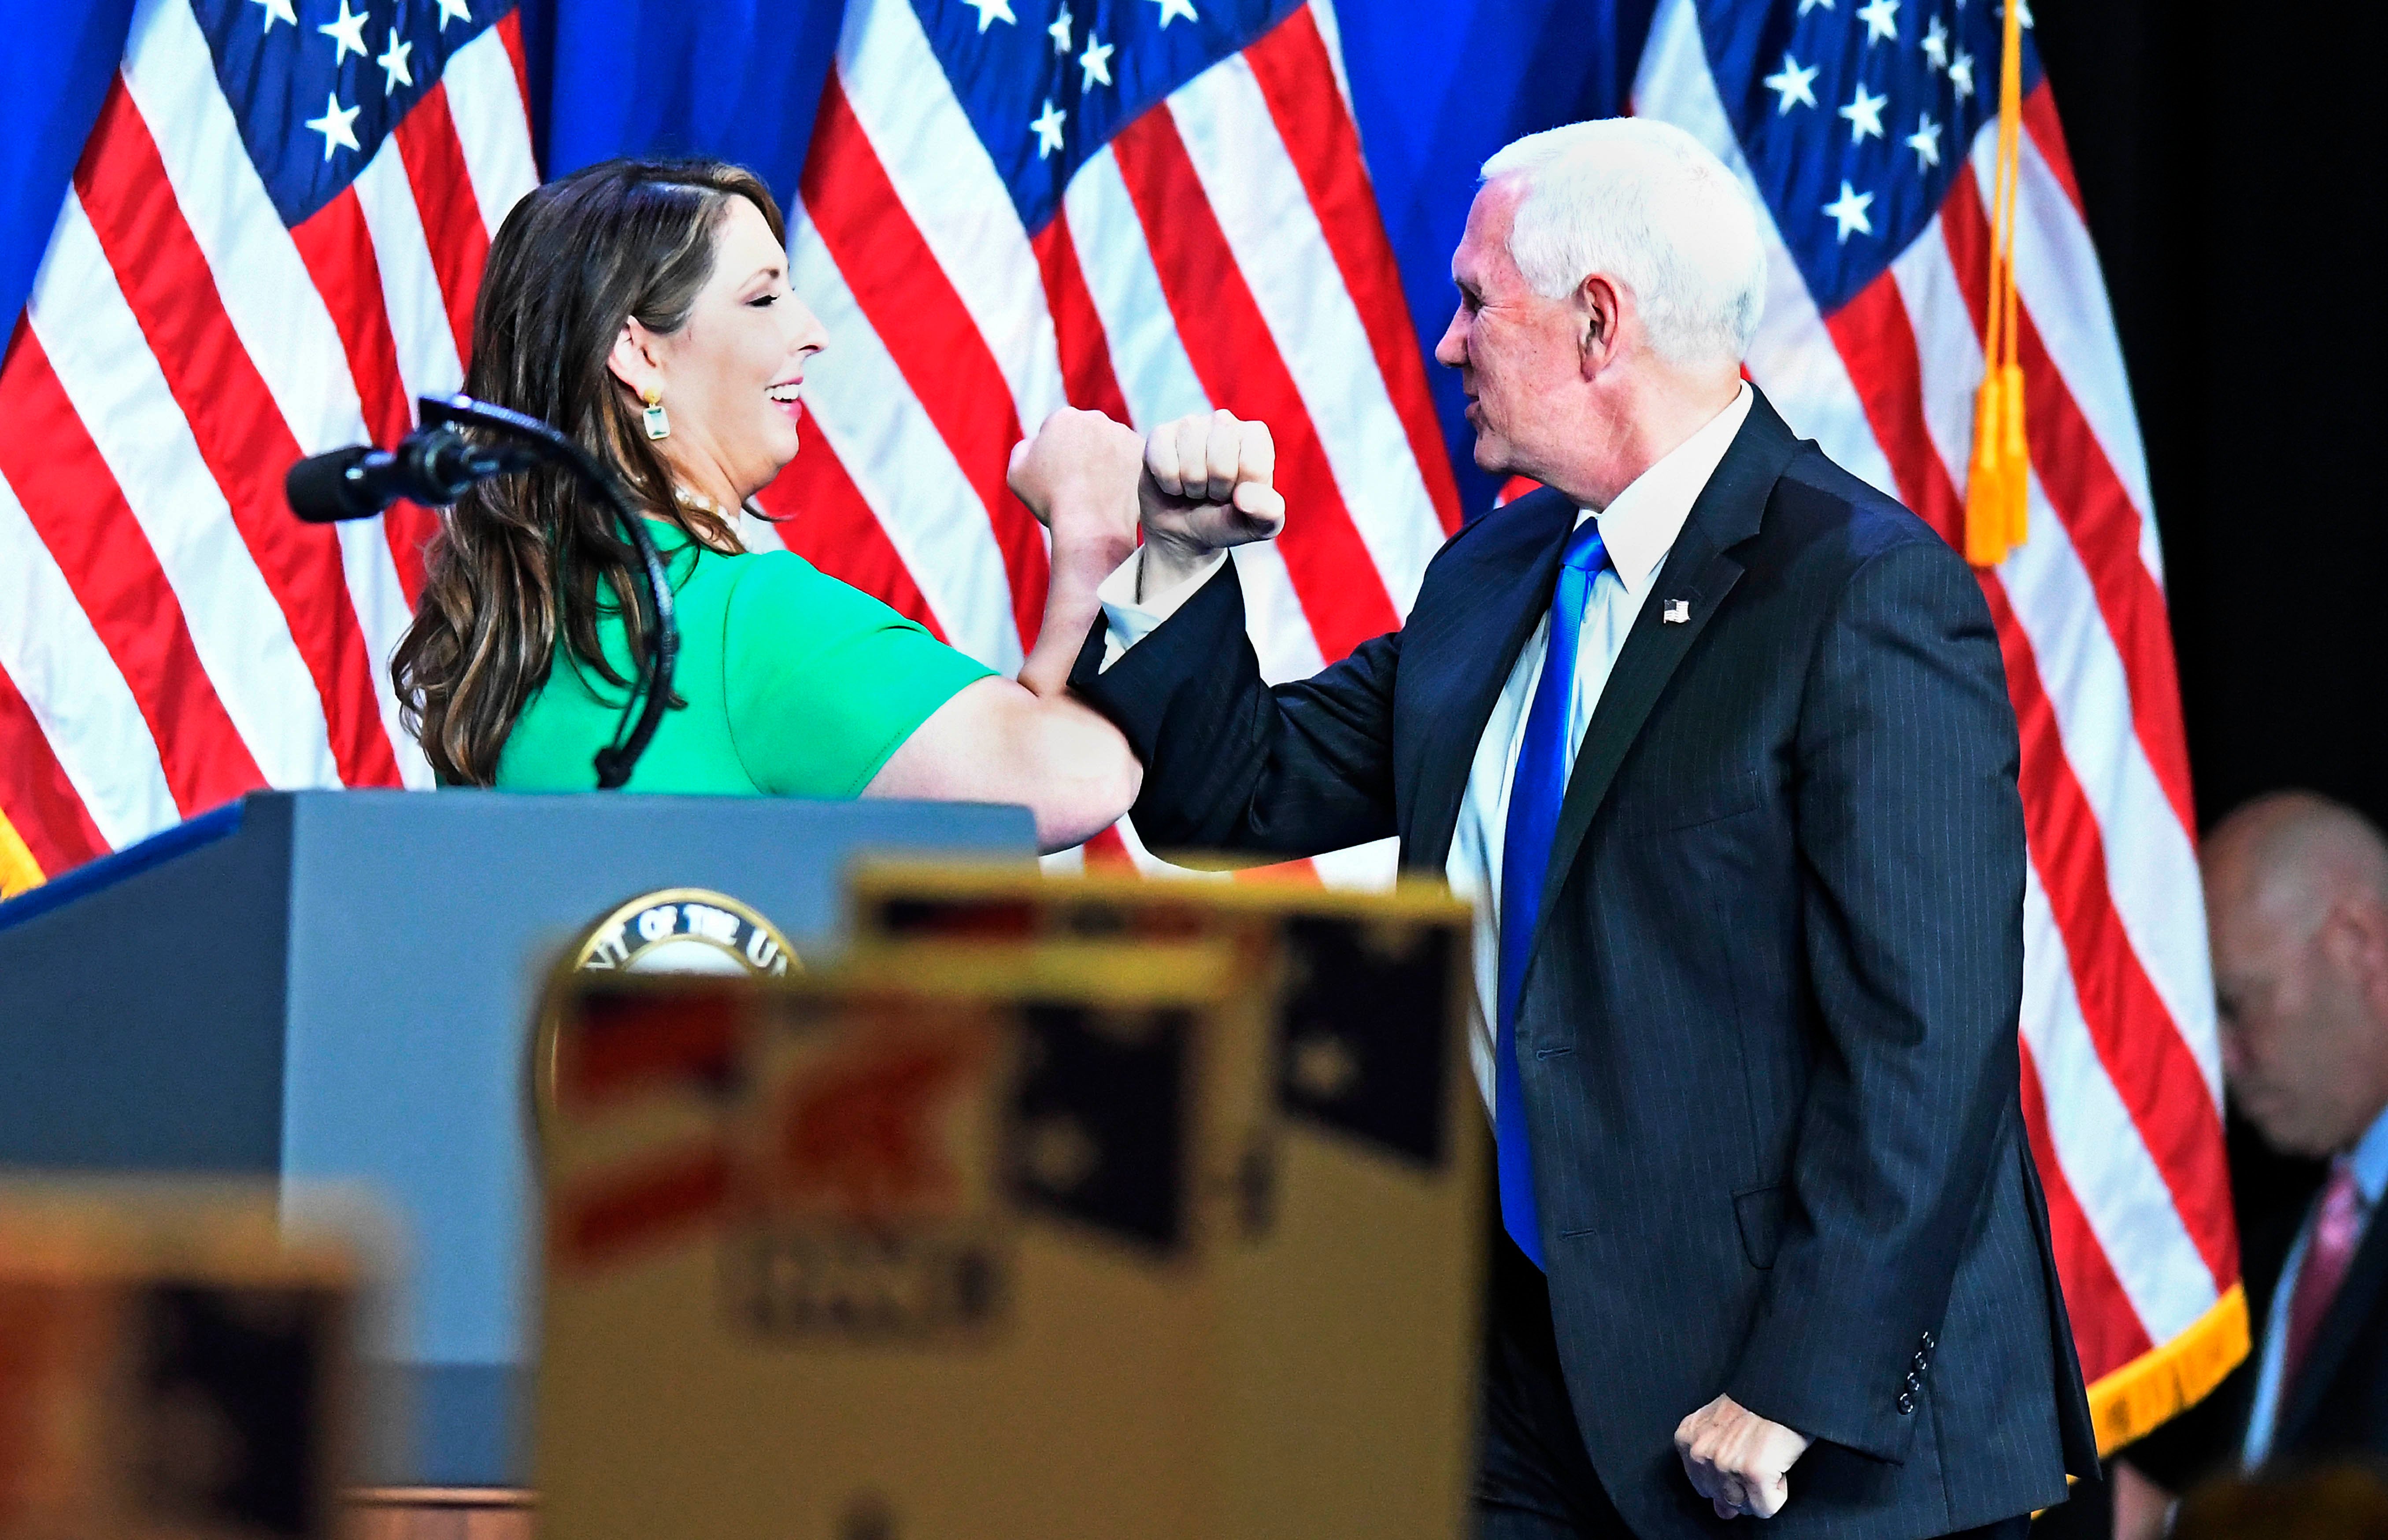 McDaniel greets Vice President Mike Pence on the first day of the Republican National Convention at the Charlotte Convention Center in August 2020